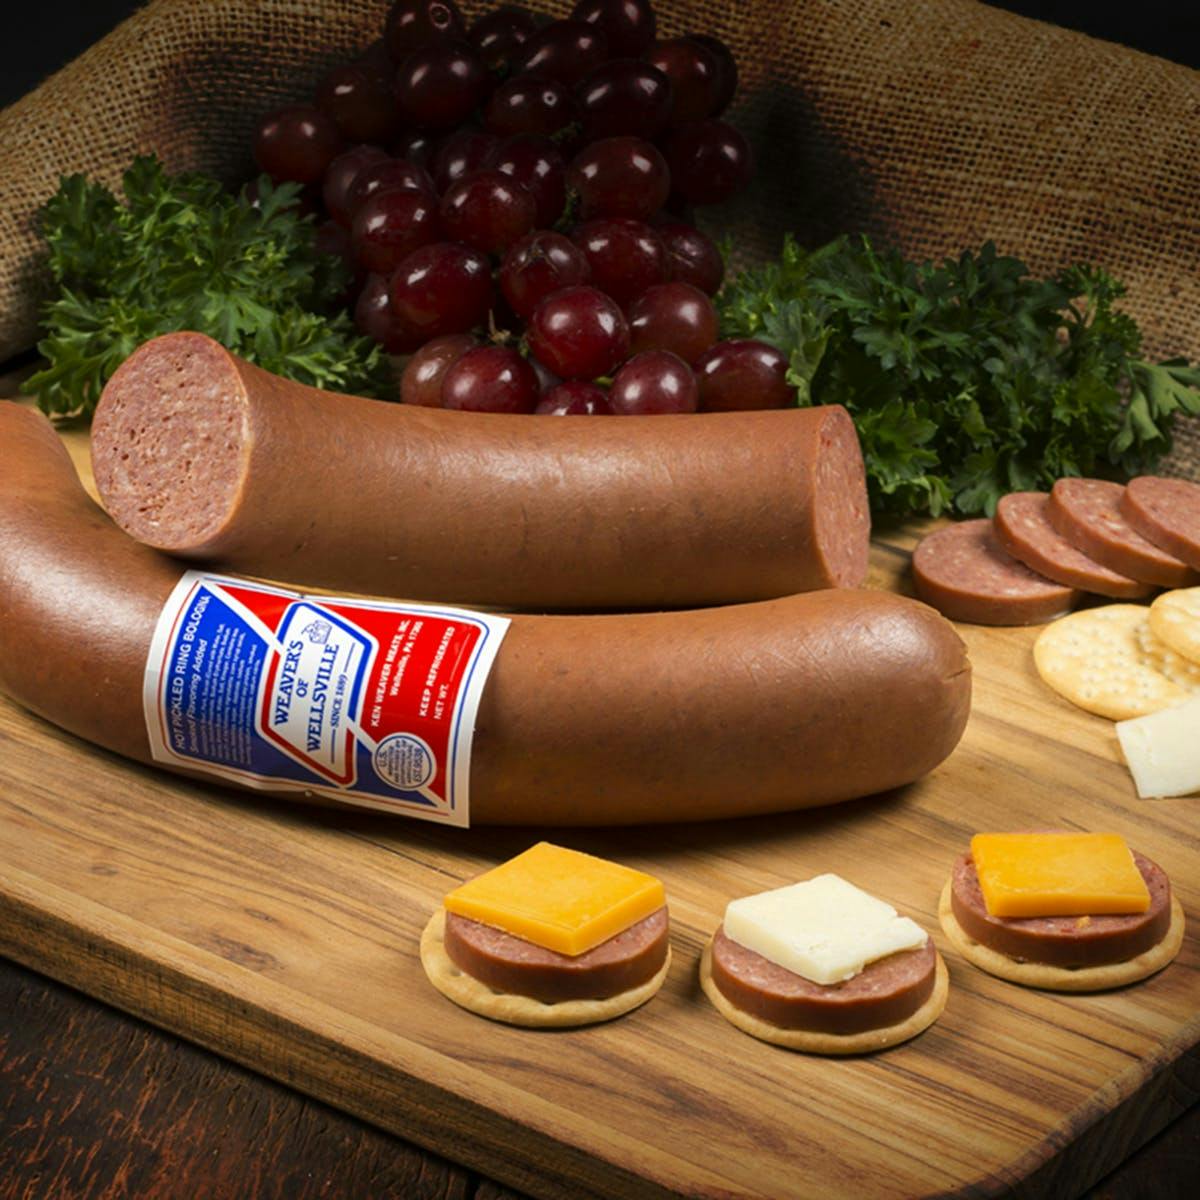 Garlic Ring Bologna (6 Packages)